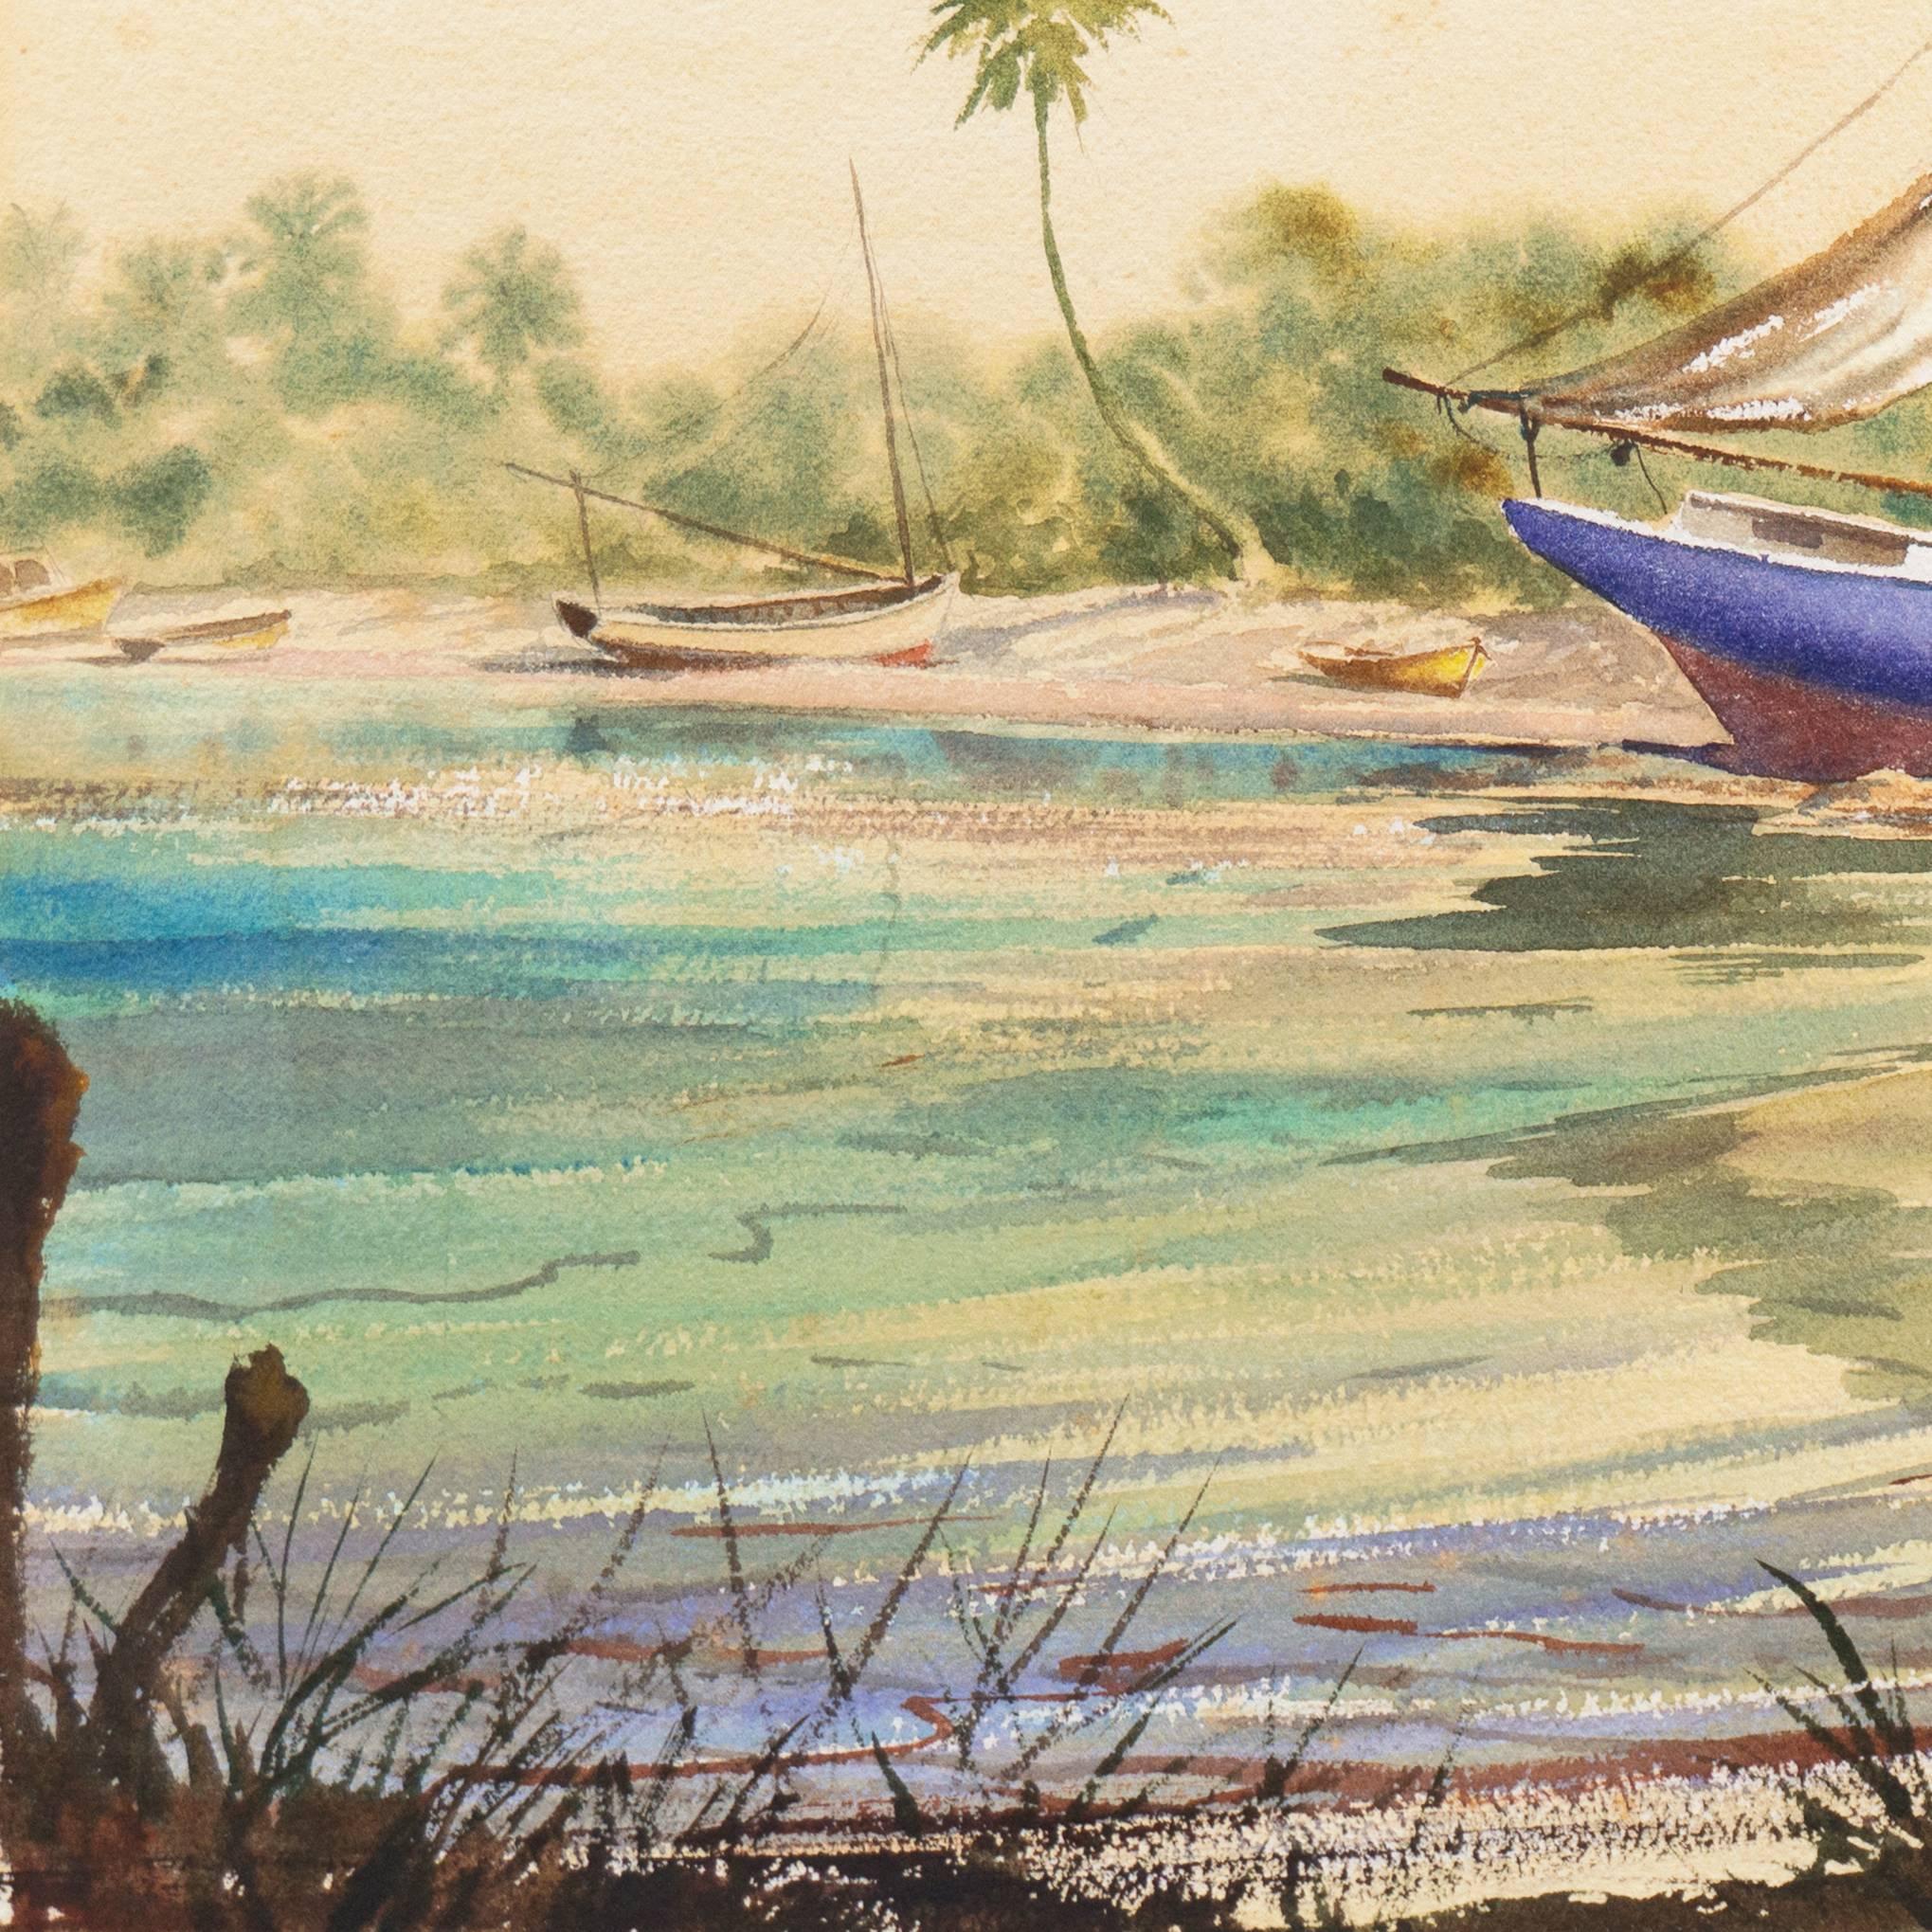 'Sailboats Drawn up in a Tropical Inlet', Florida - Beige Landscape Art by Kaspar-Andreas Zimmermann